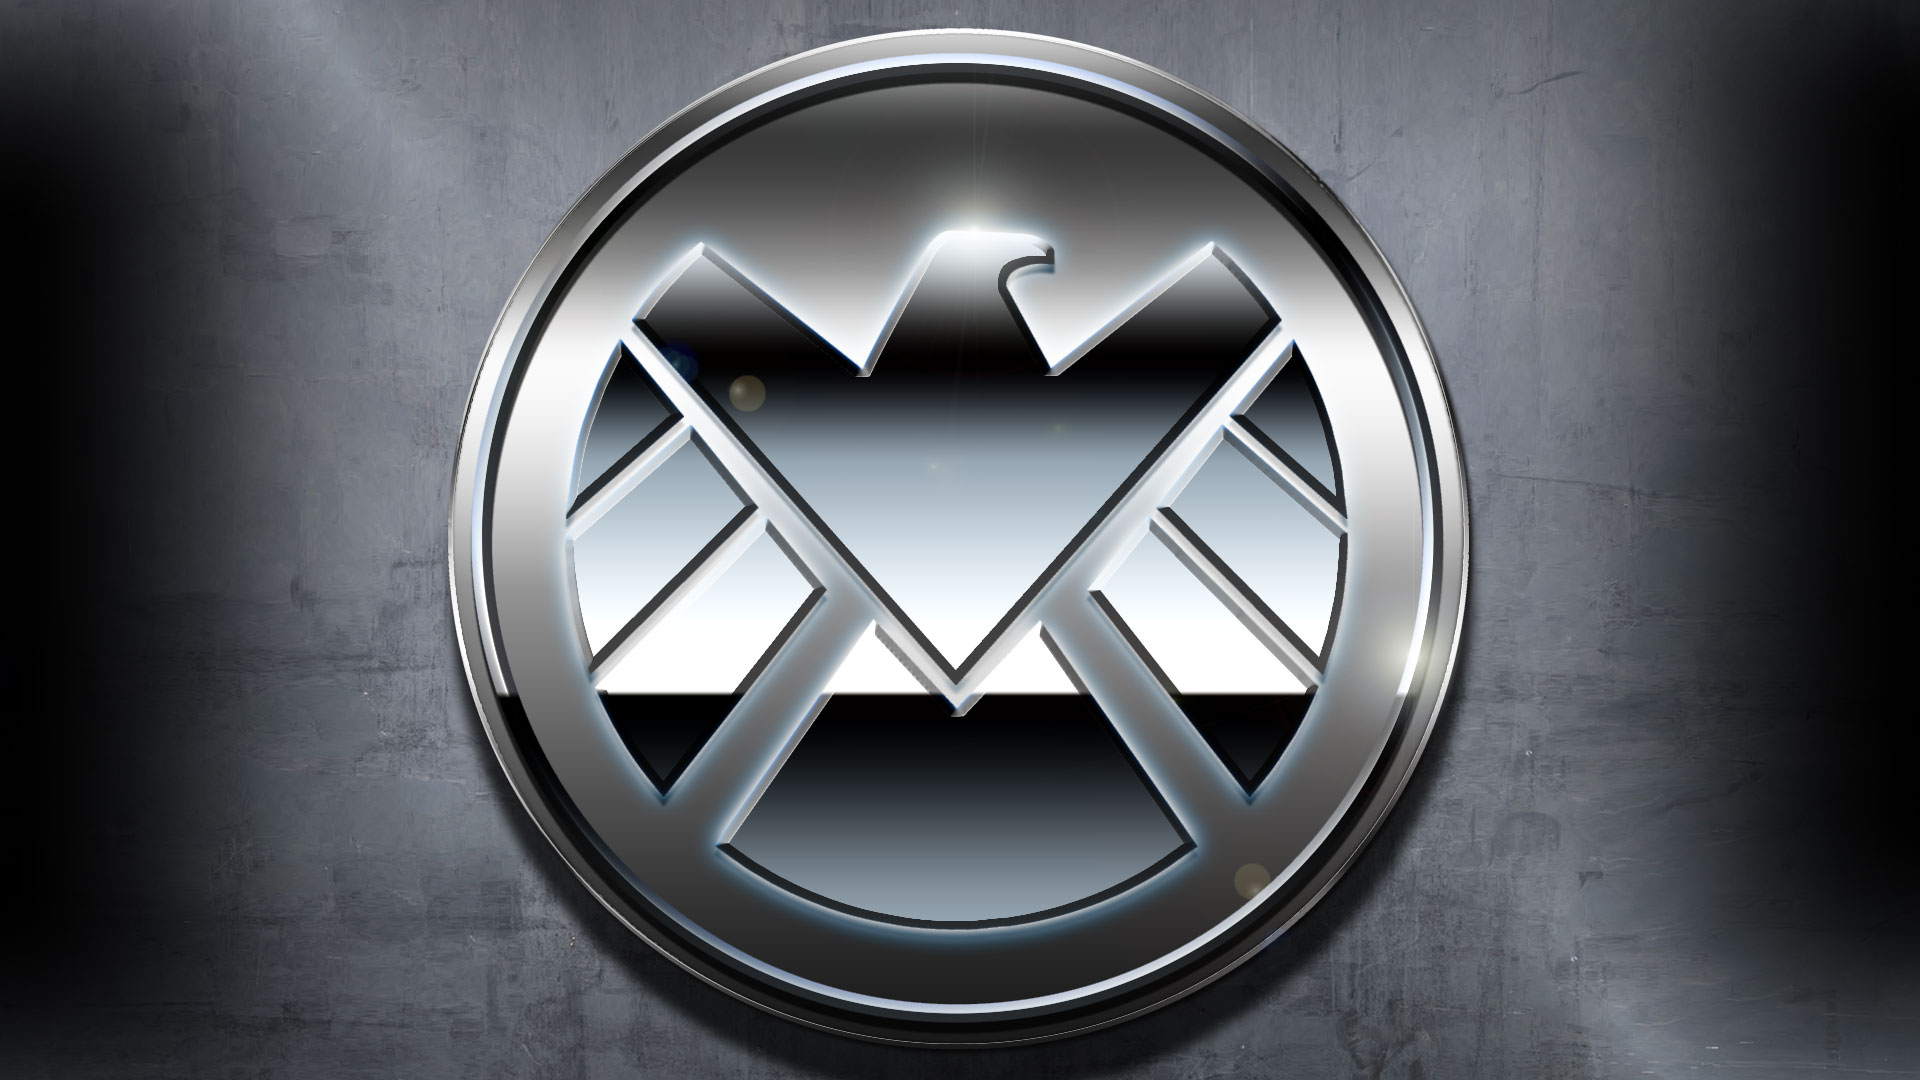 agents of shield logo wallpaper Top HQ Wallpapers